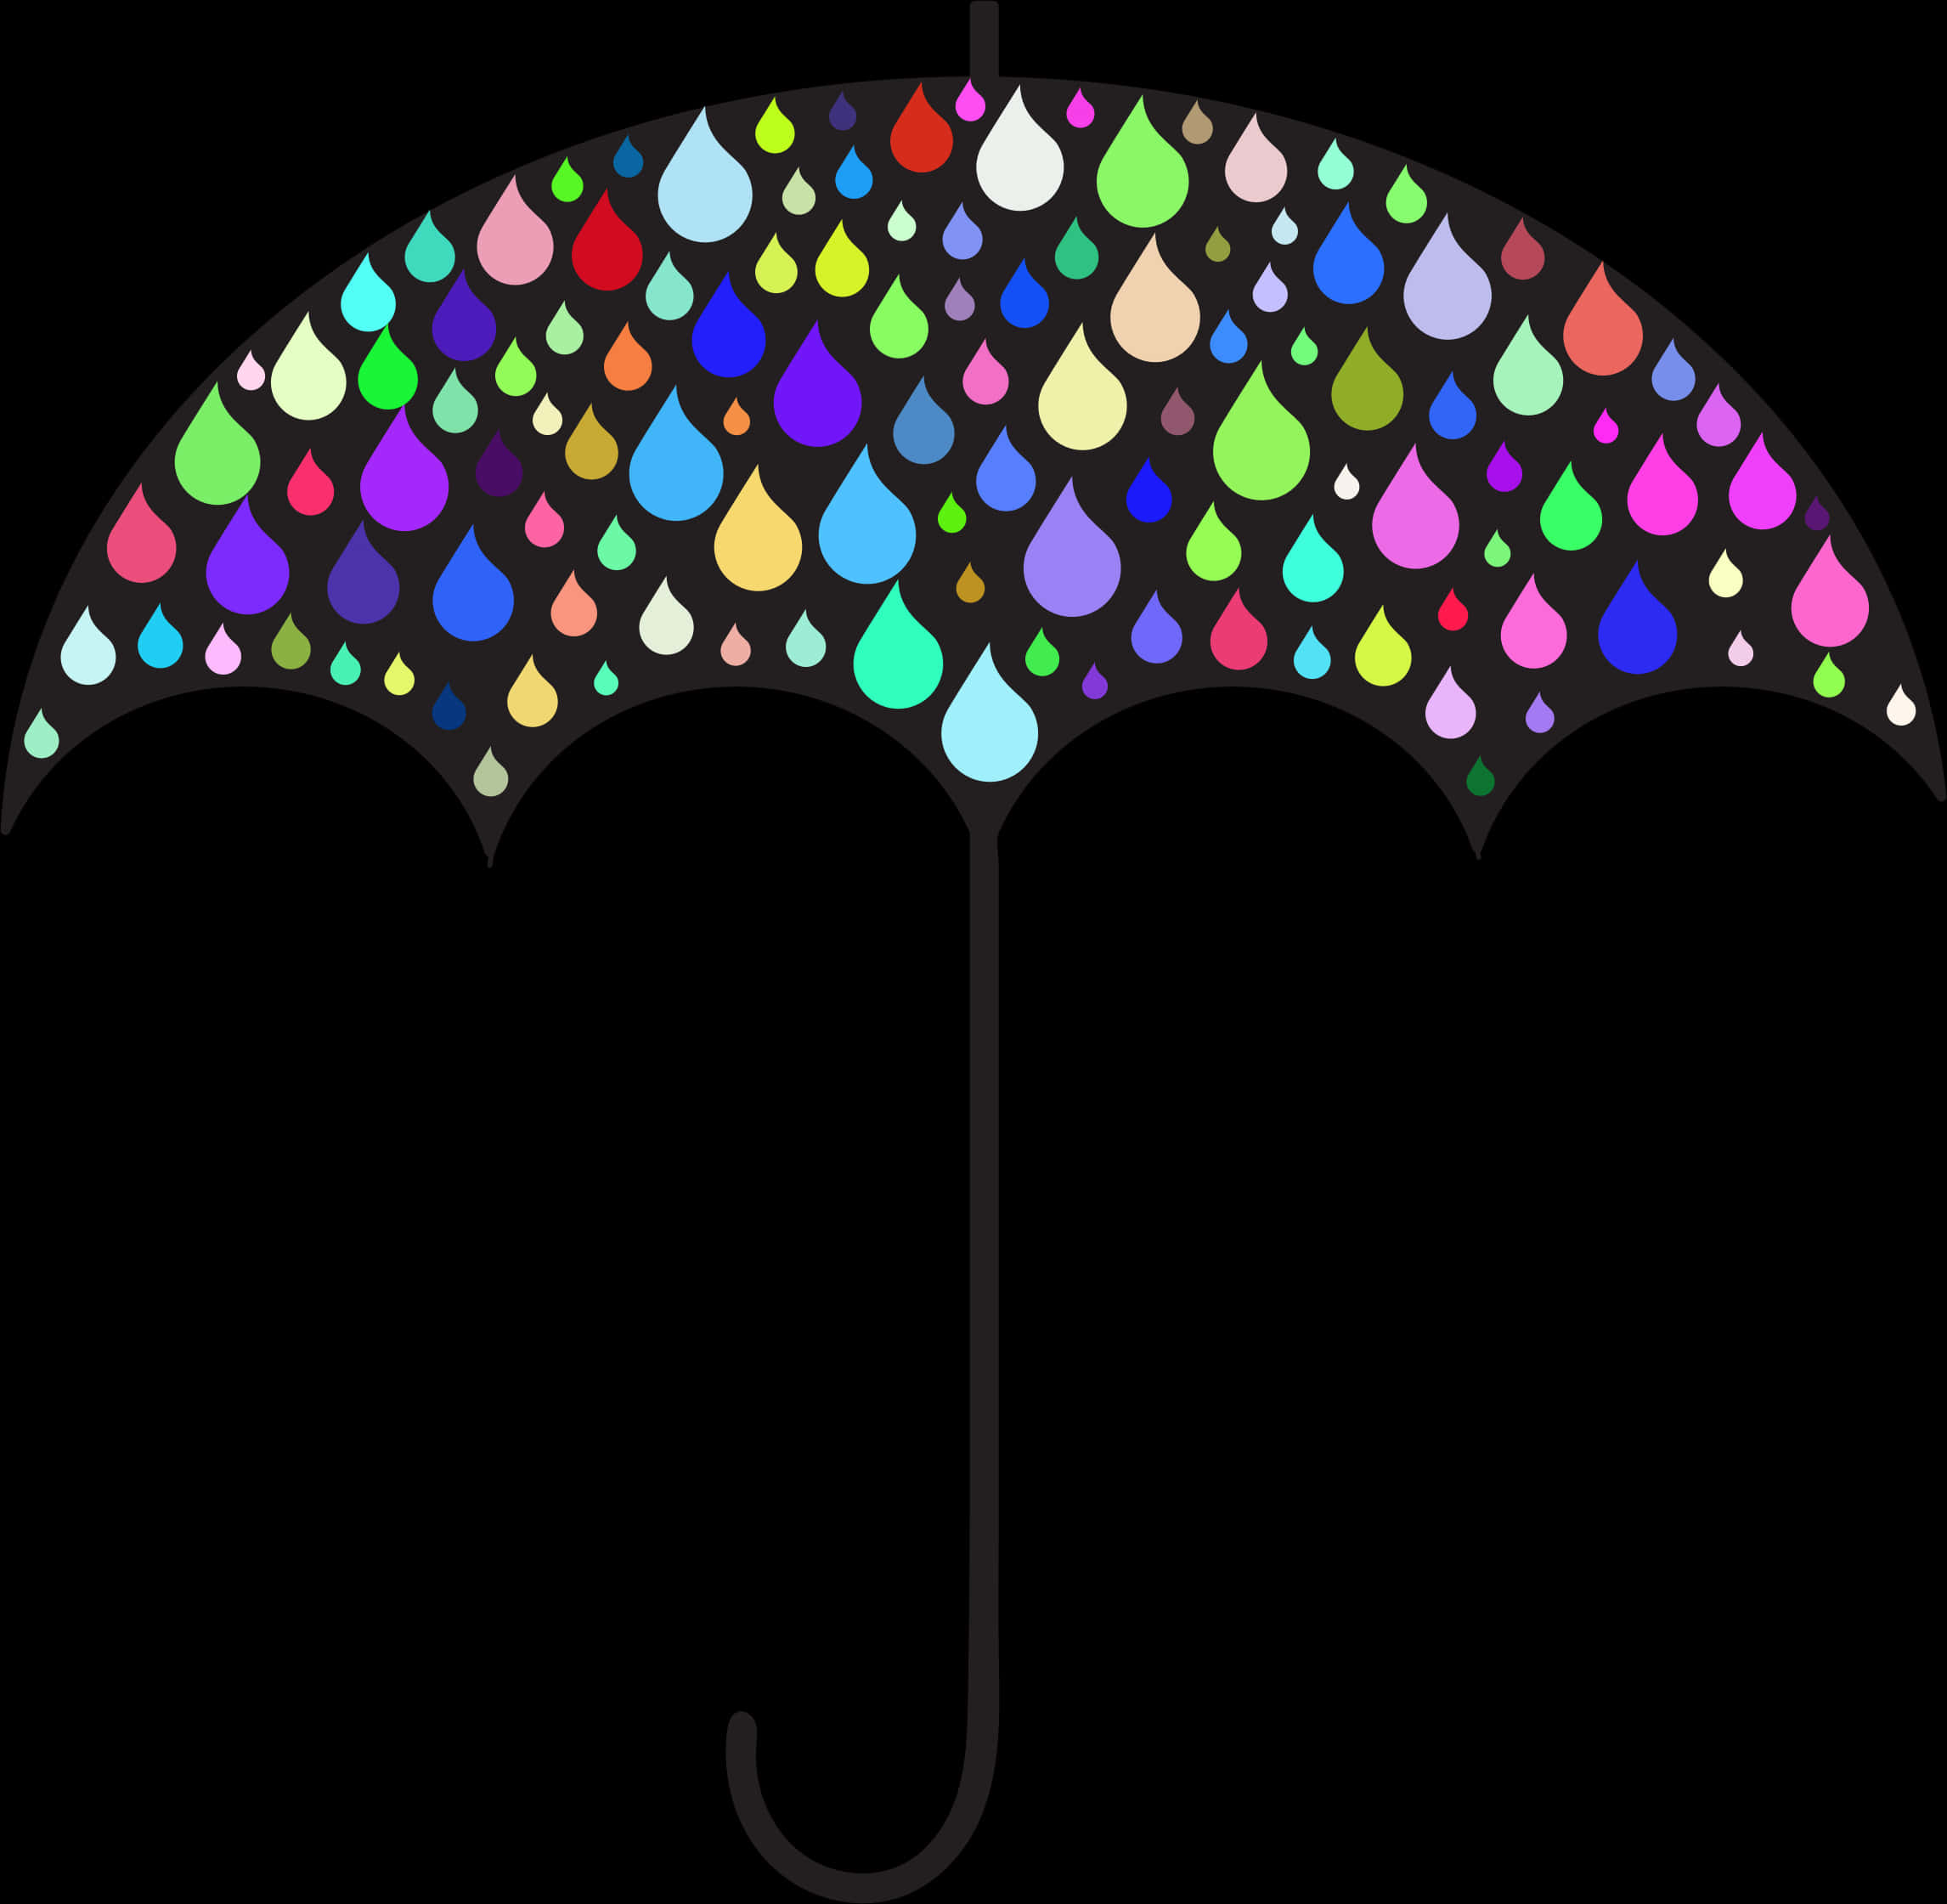 A Colorful Umbrella With Many Drops Of Water On It